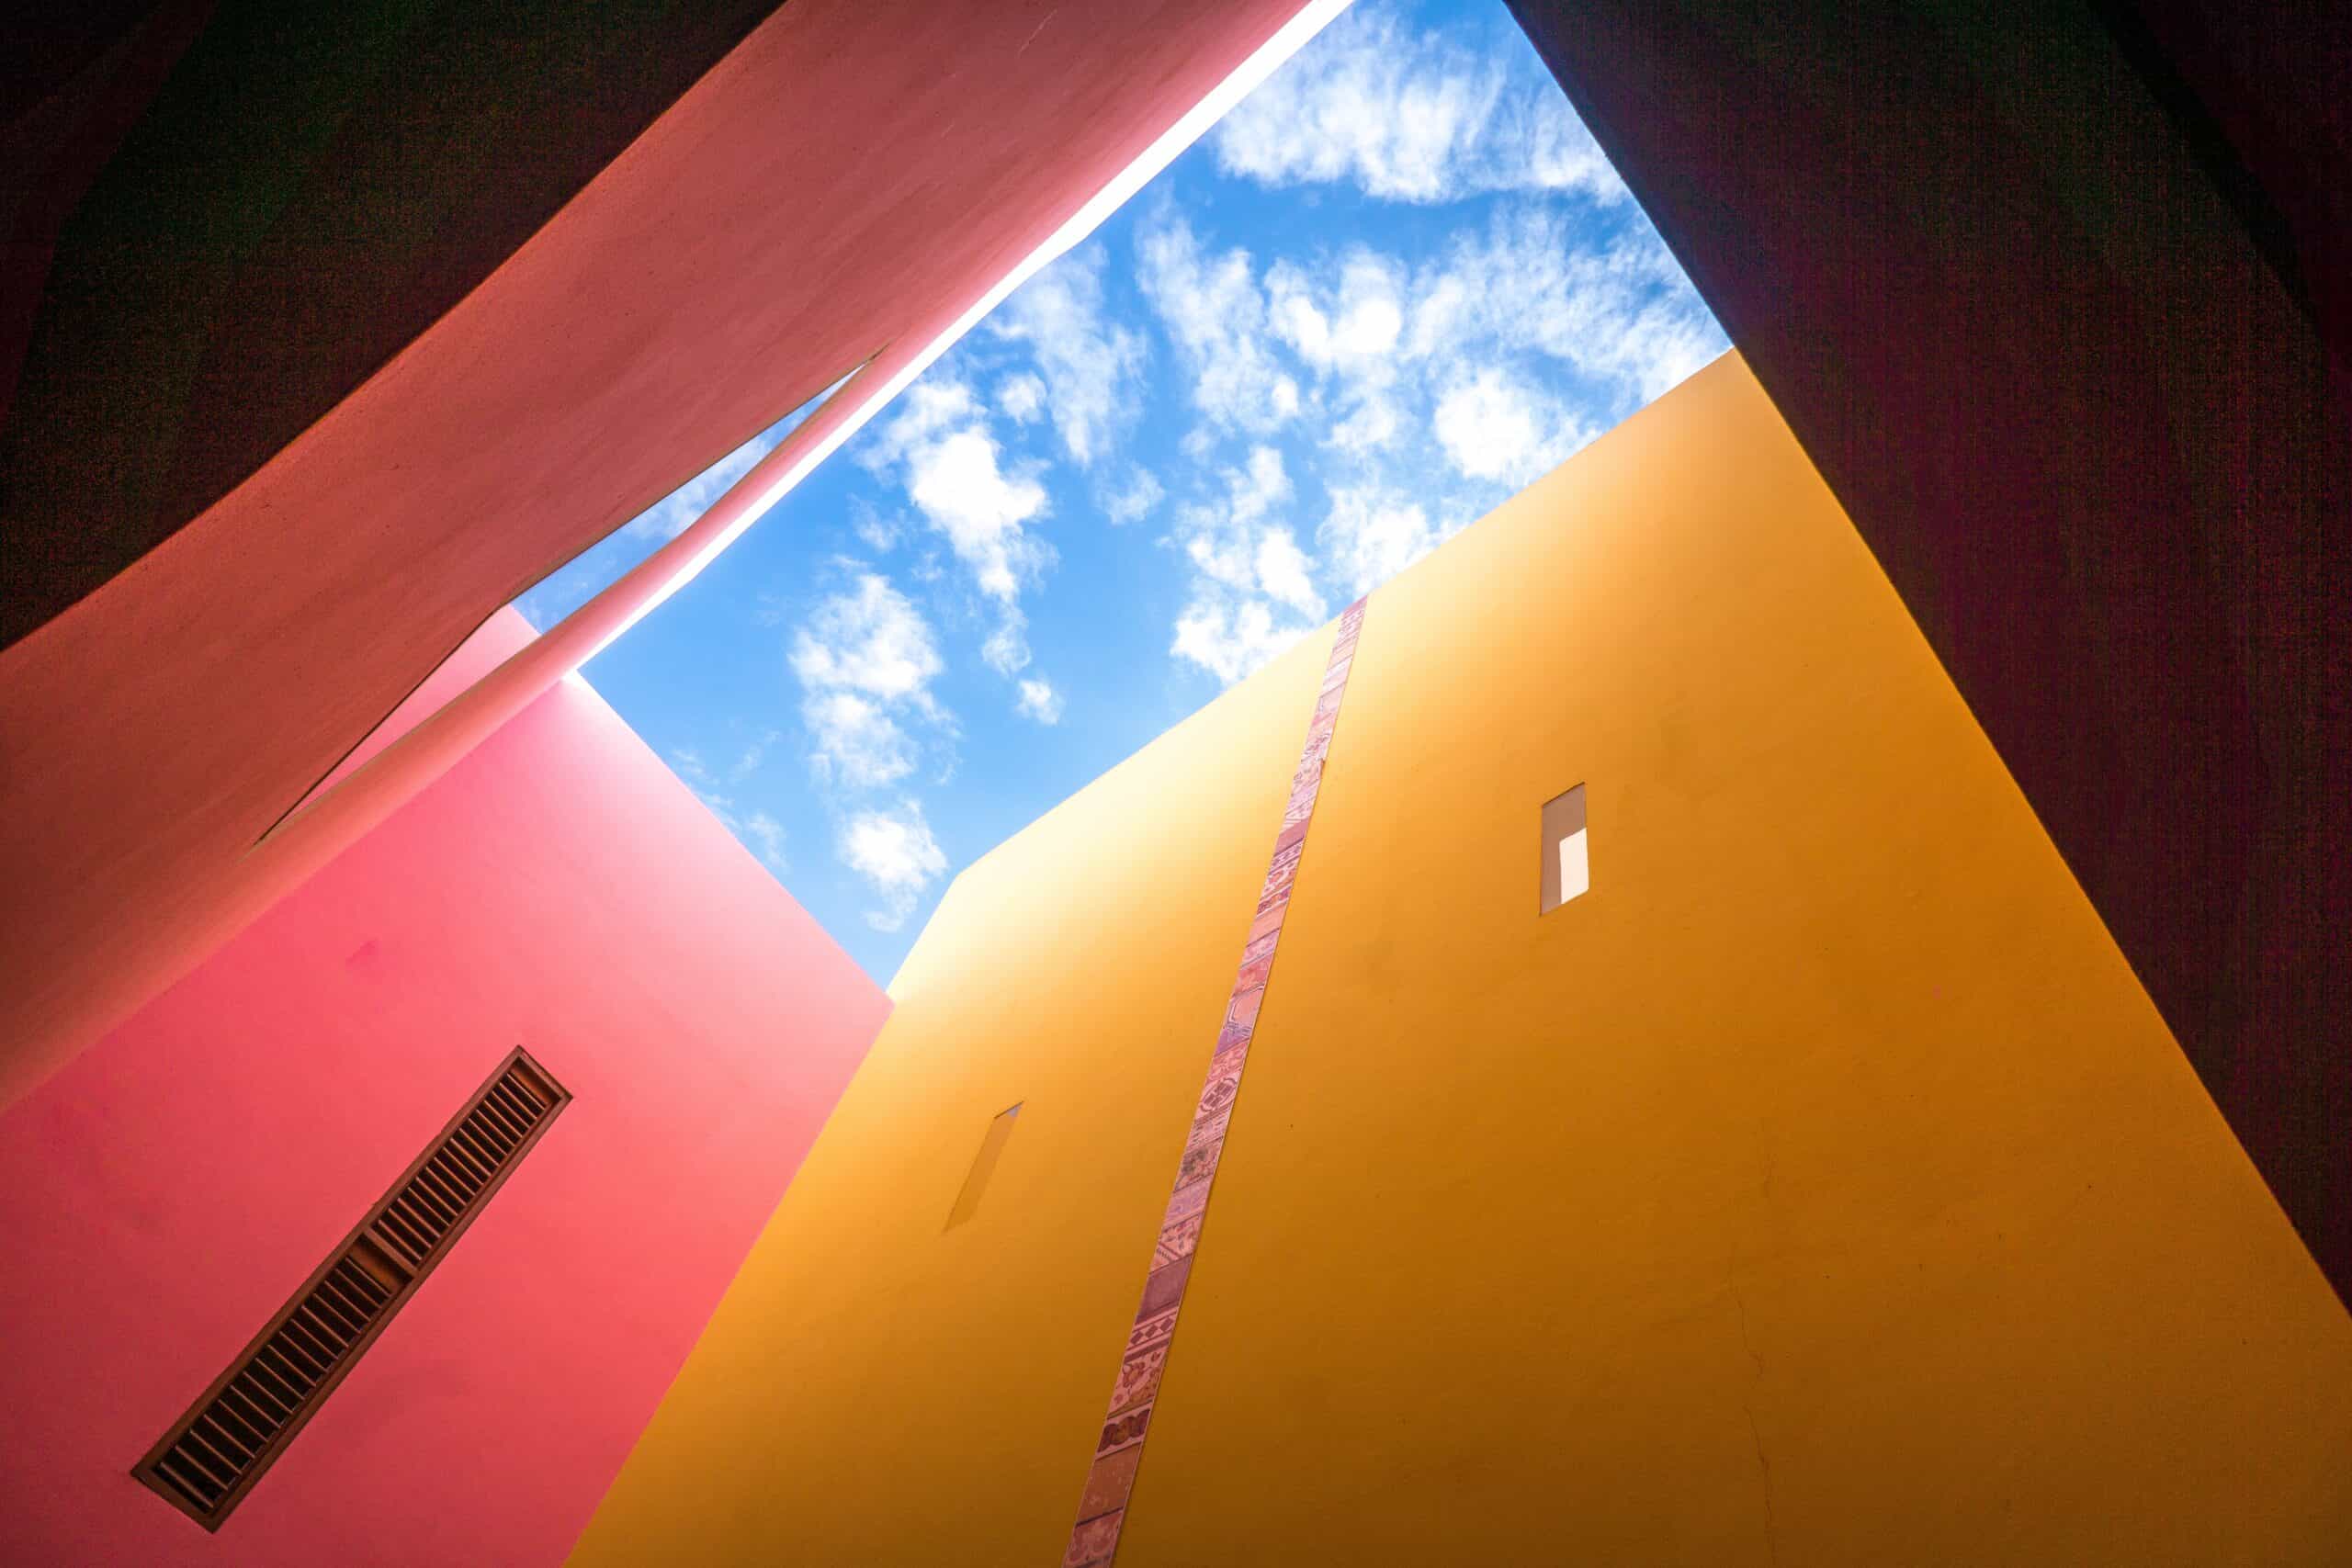 Buildings painted in different colors, looking from below towards the sky.